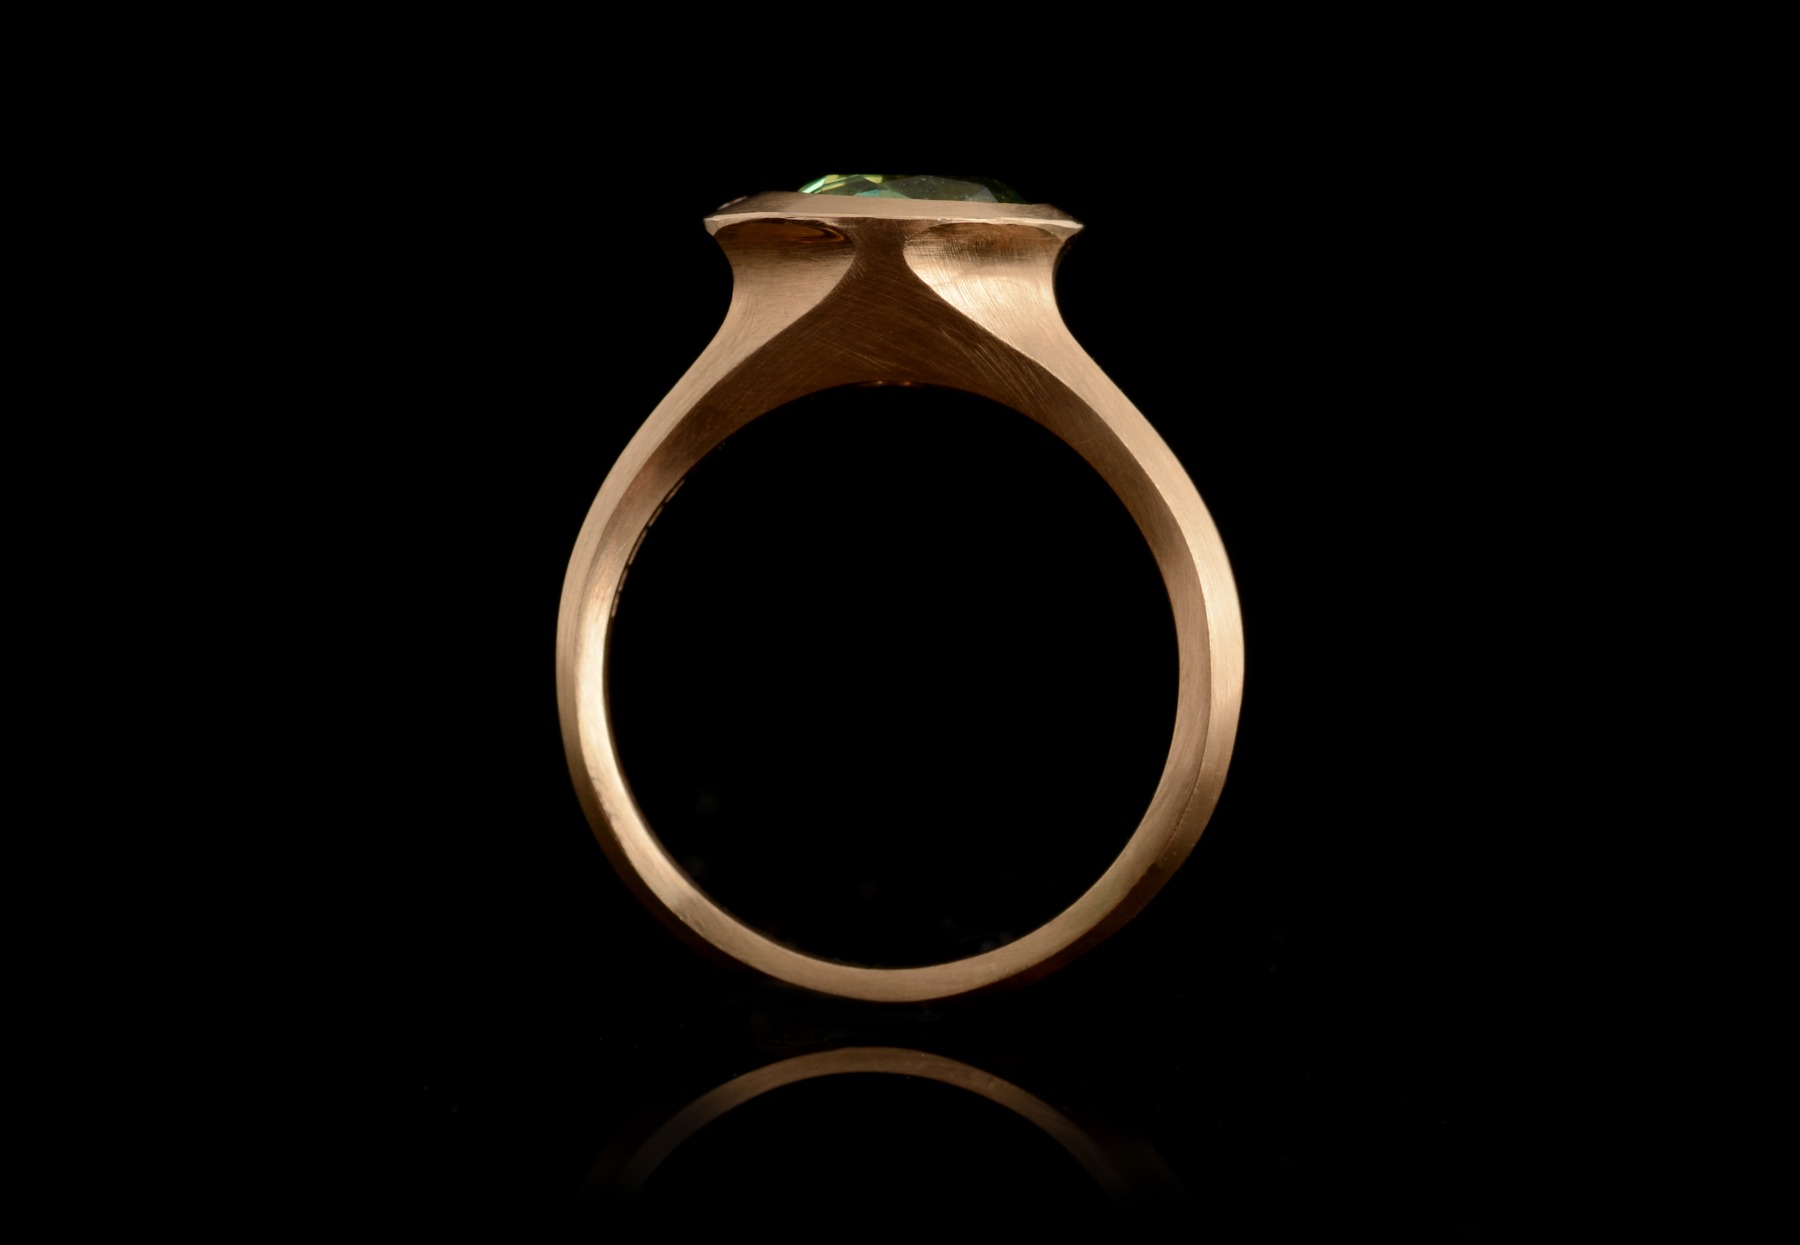 Arris rose gold ring with oval tsavorite garnet and white diamonds